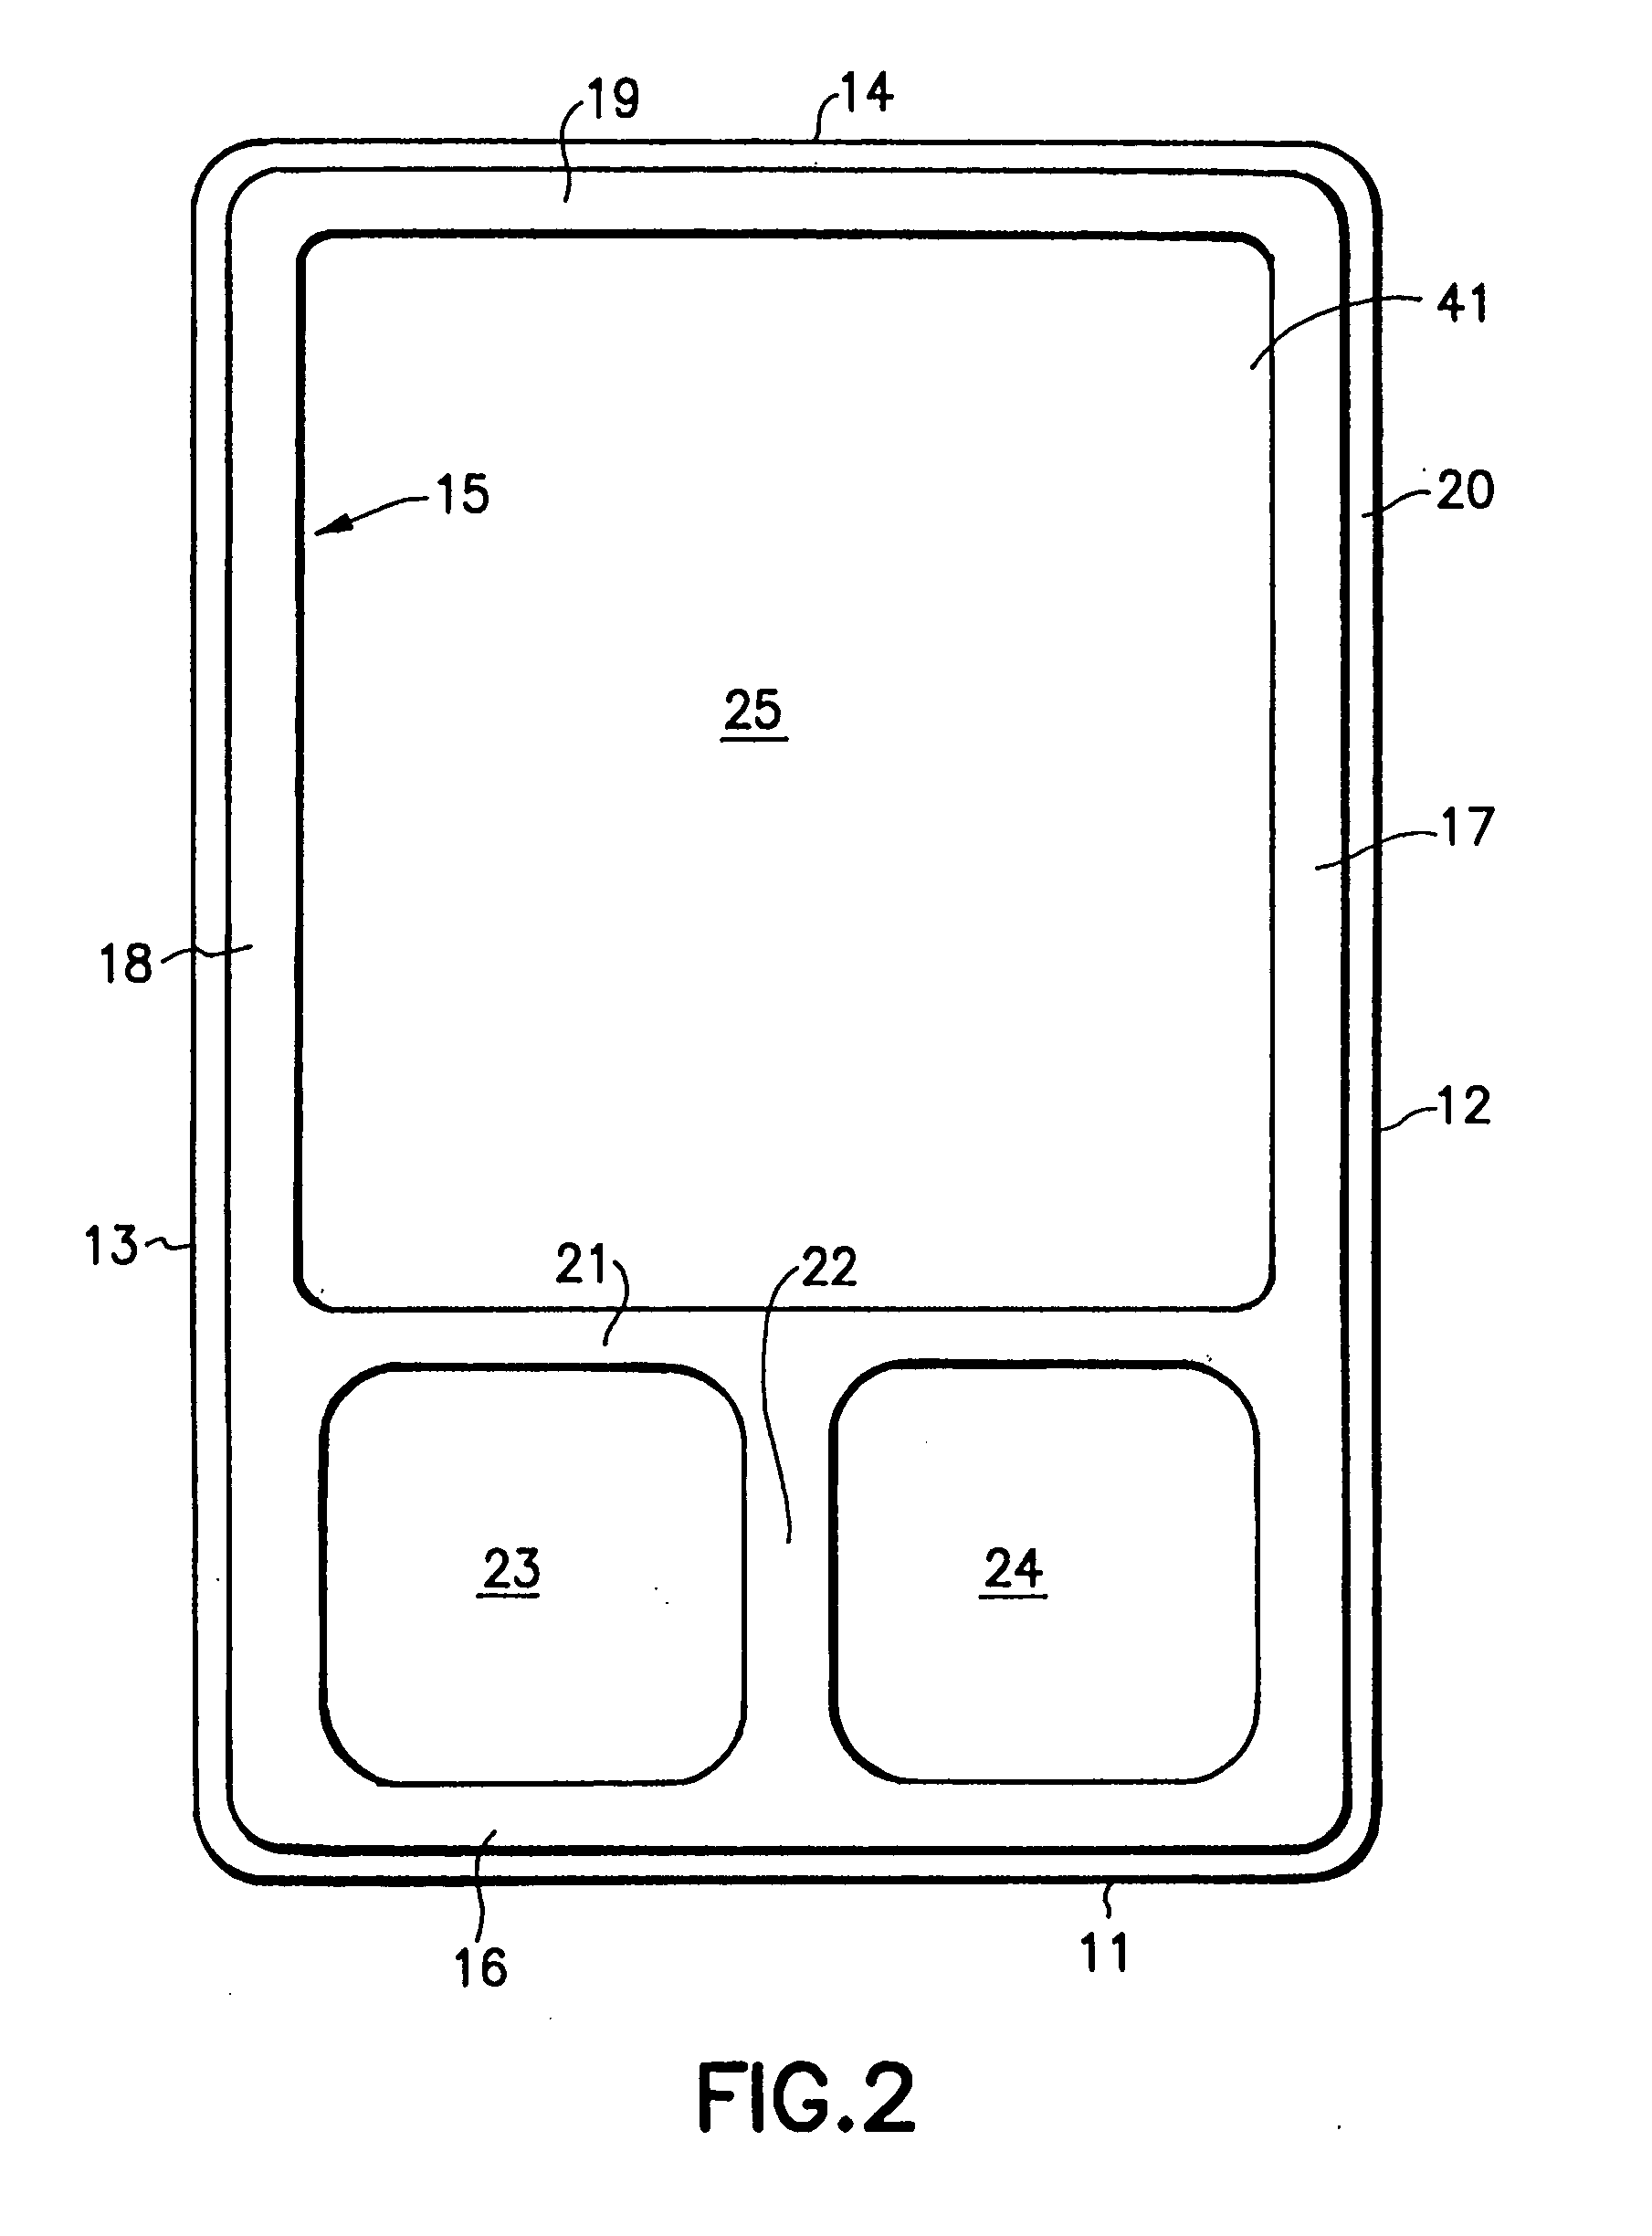 Device for pharmacy prescription shelf use to store medications and information related to the medications